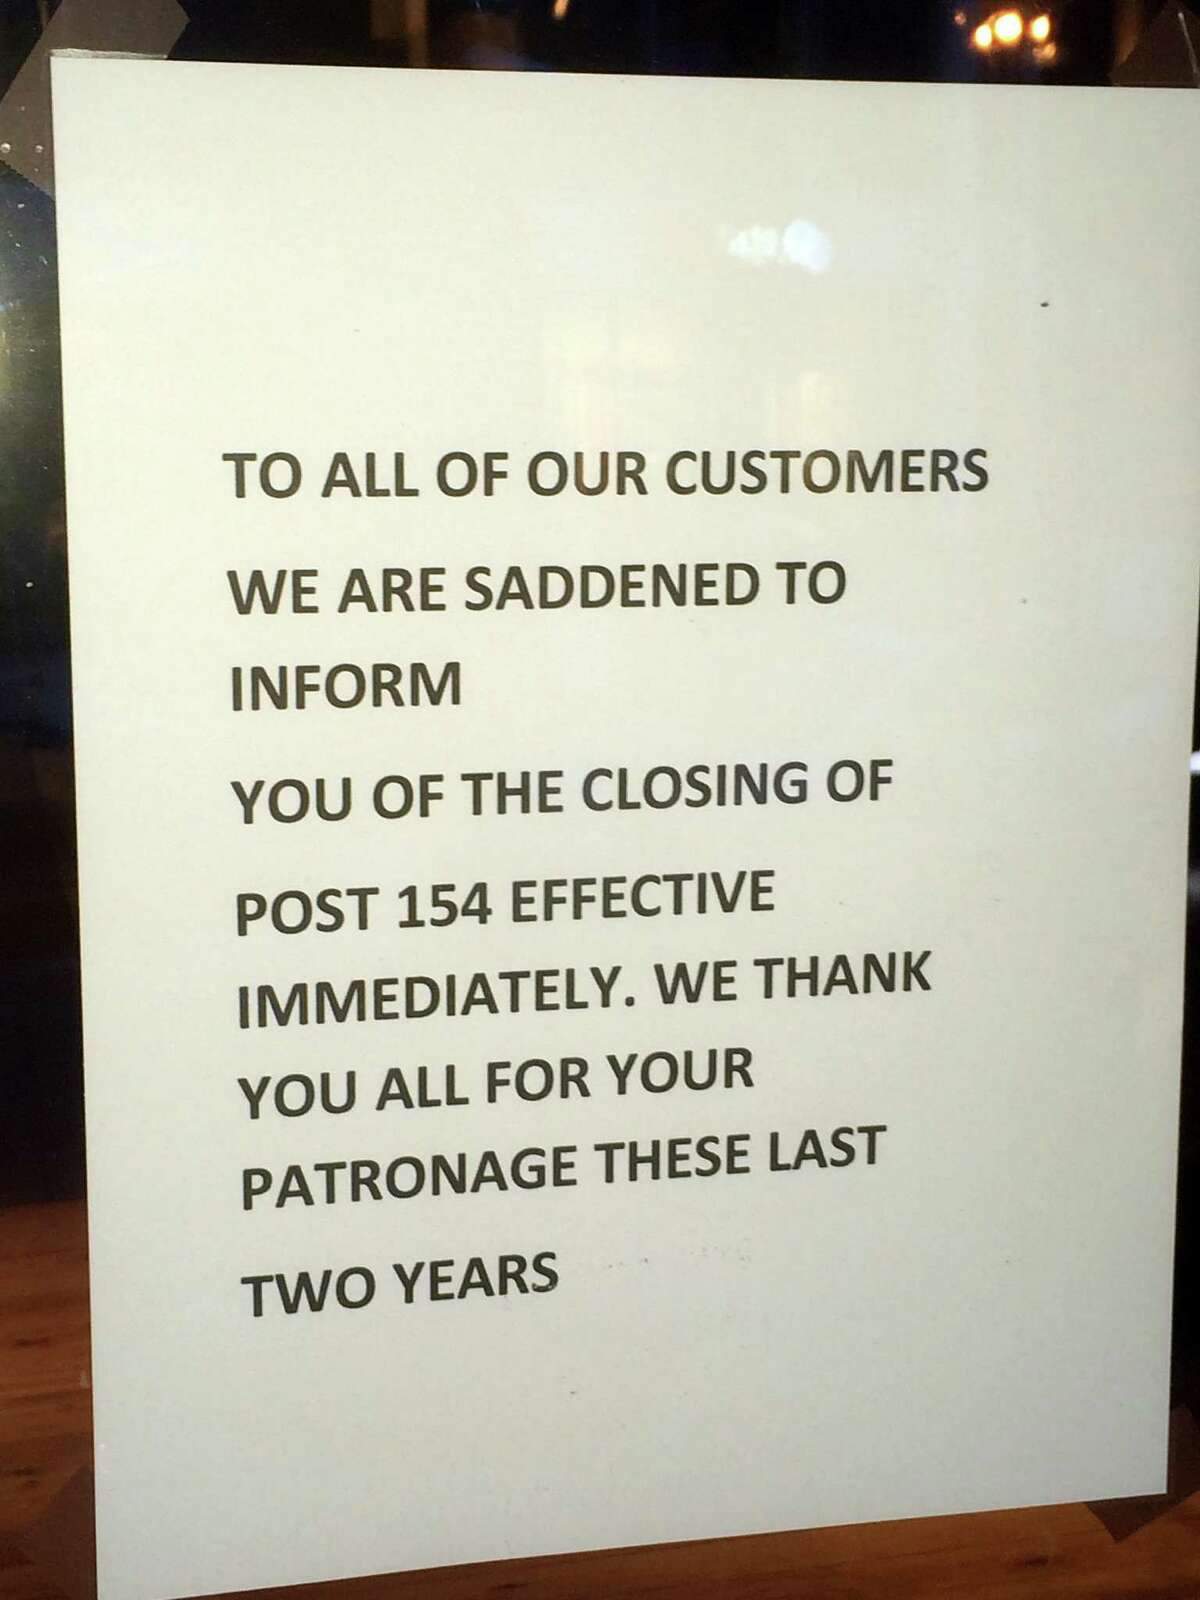 This sign announcing the closing of Post 154 restautant, which opened in August 2013 in the former U.S. Post Office downtown, was posted on its door this week.